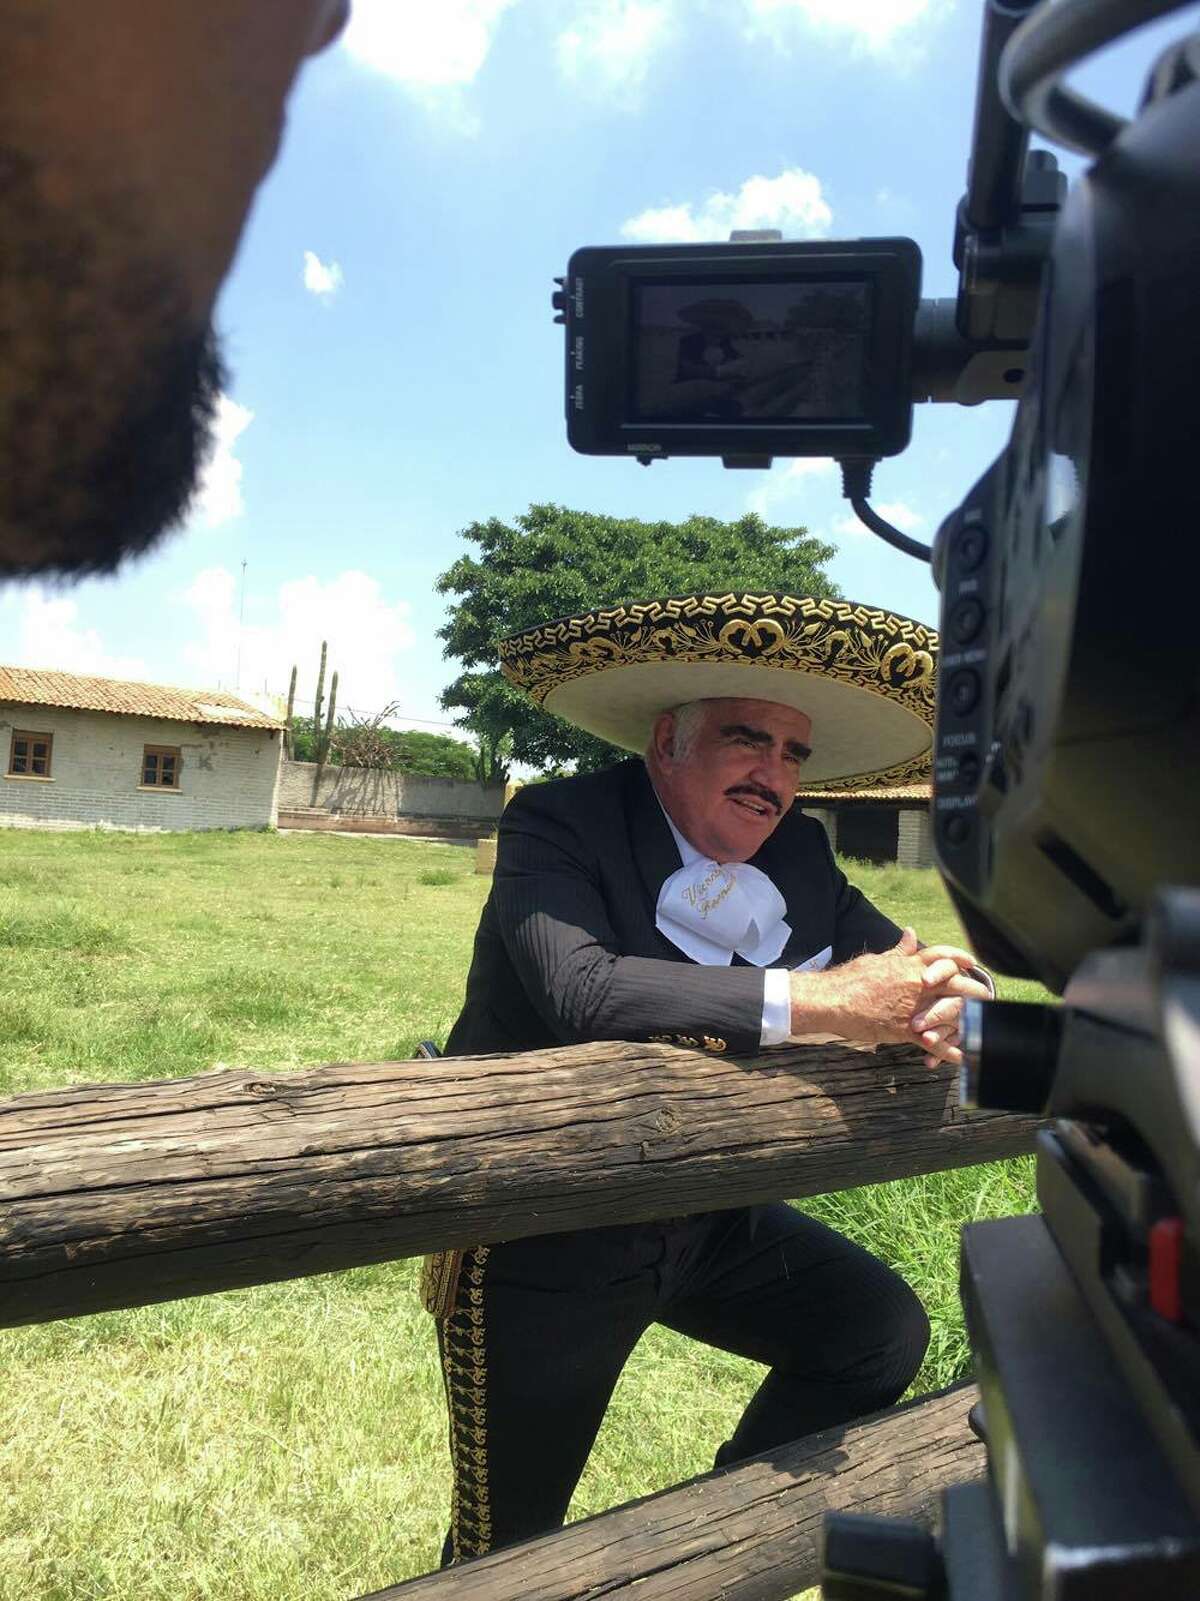 Legendary Mexican musician Vicente Fernández worked with the Latino Victory Project this month to release a corrido and music video directed by San Antonio's Bauhaus Media Group in support of Hillary Clinton for U.S. President.